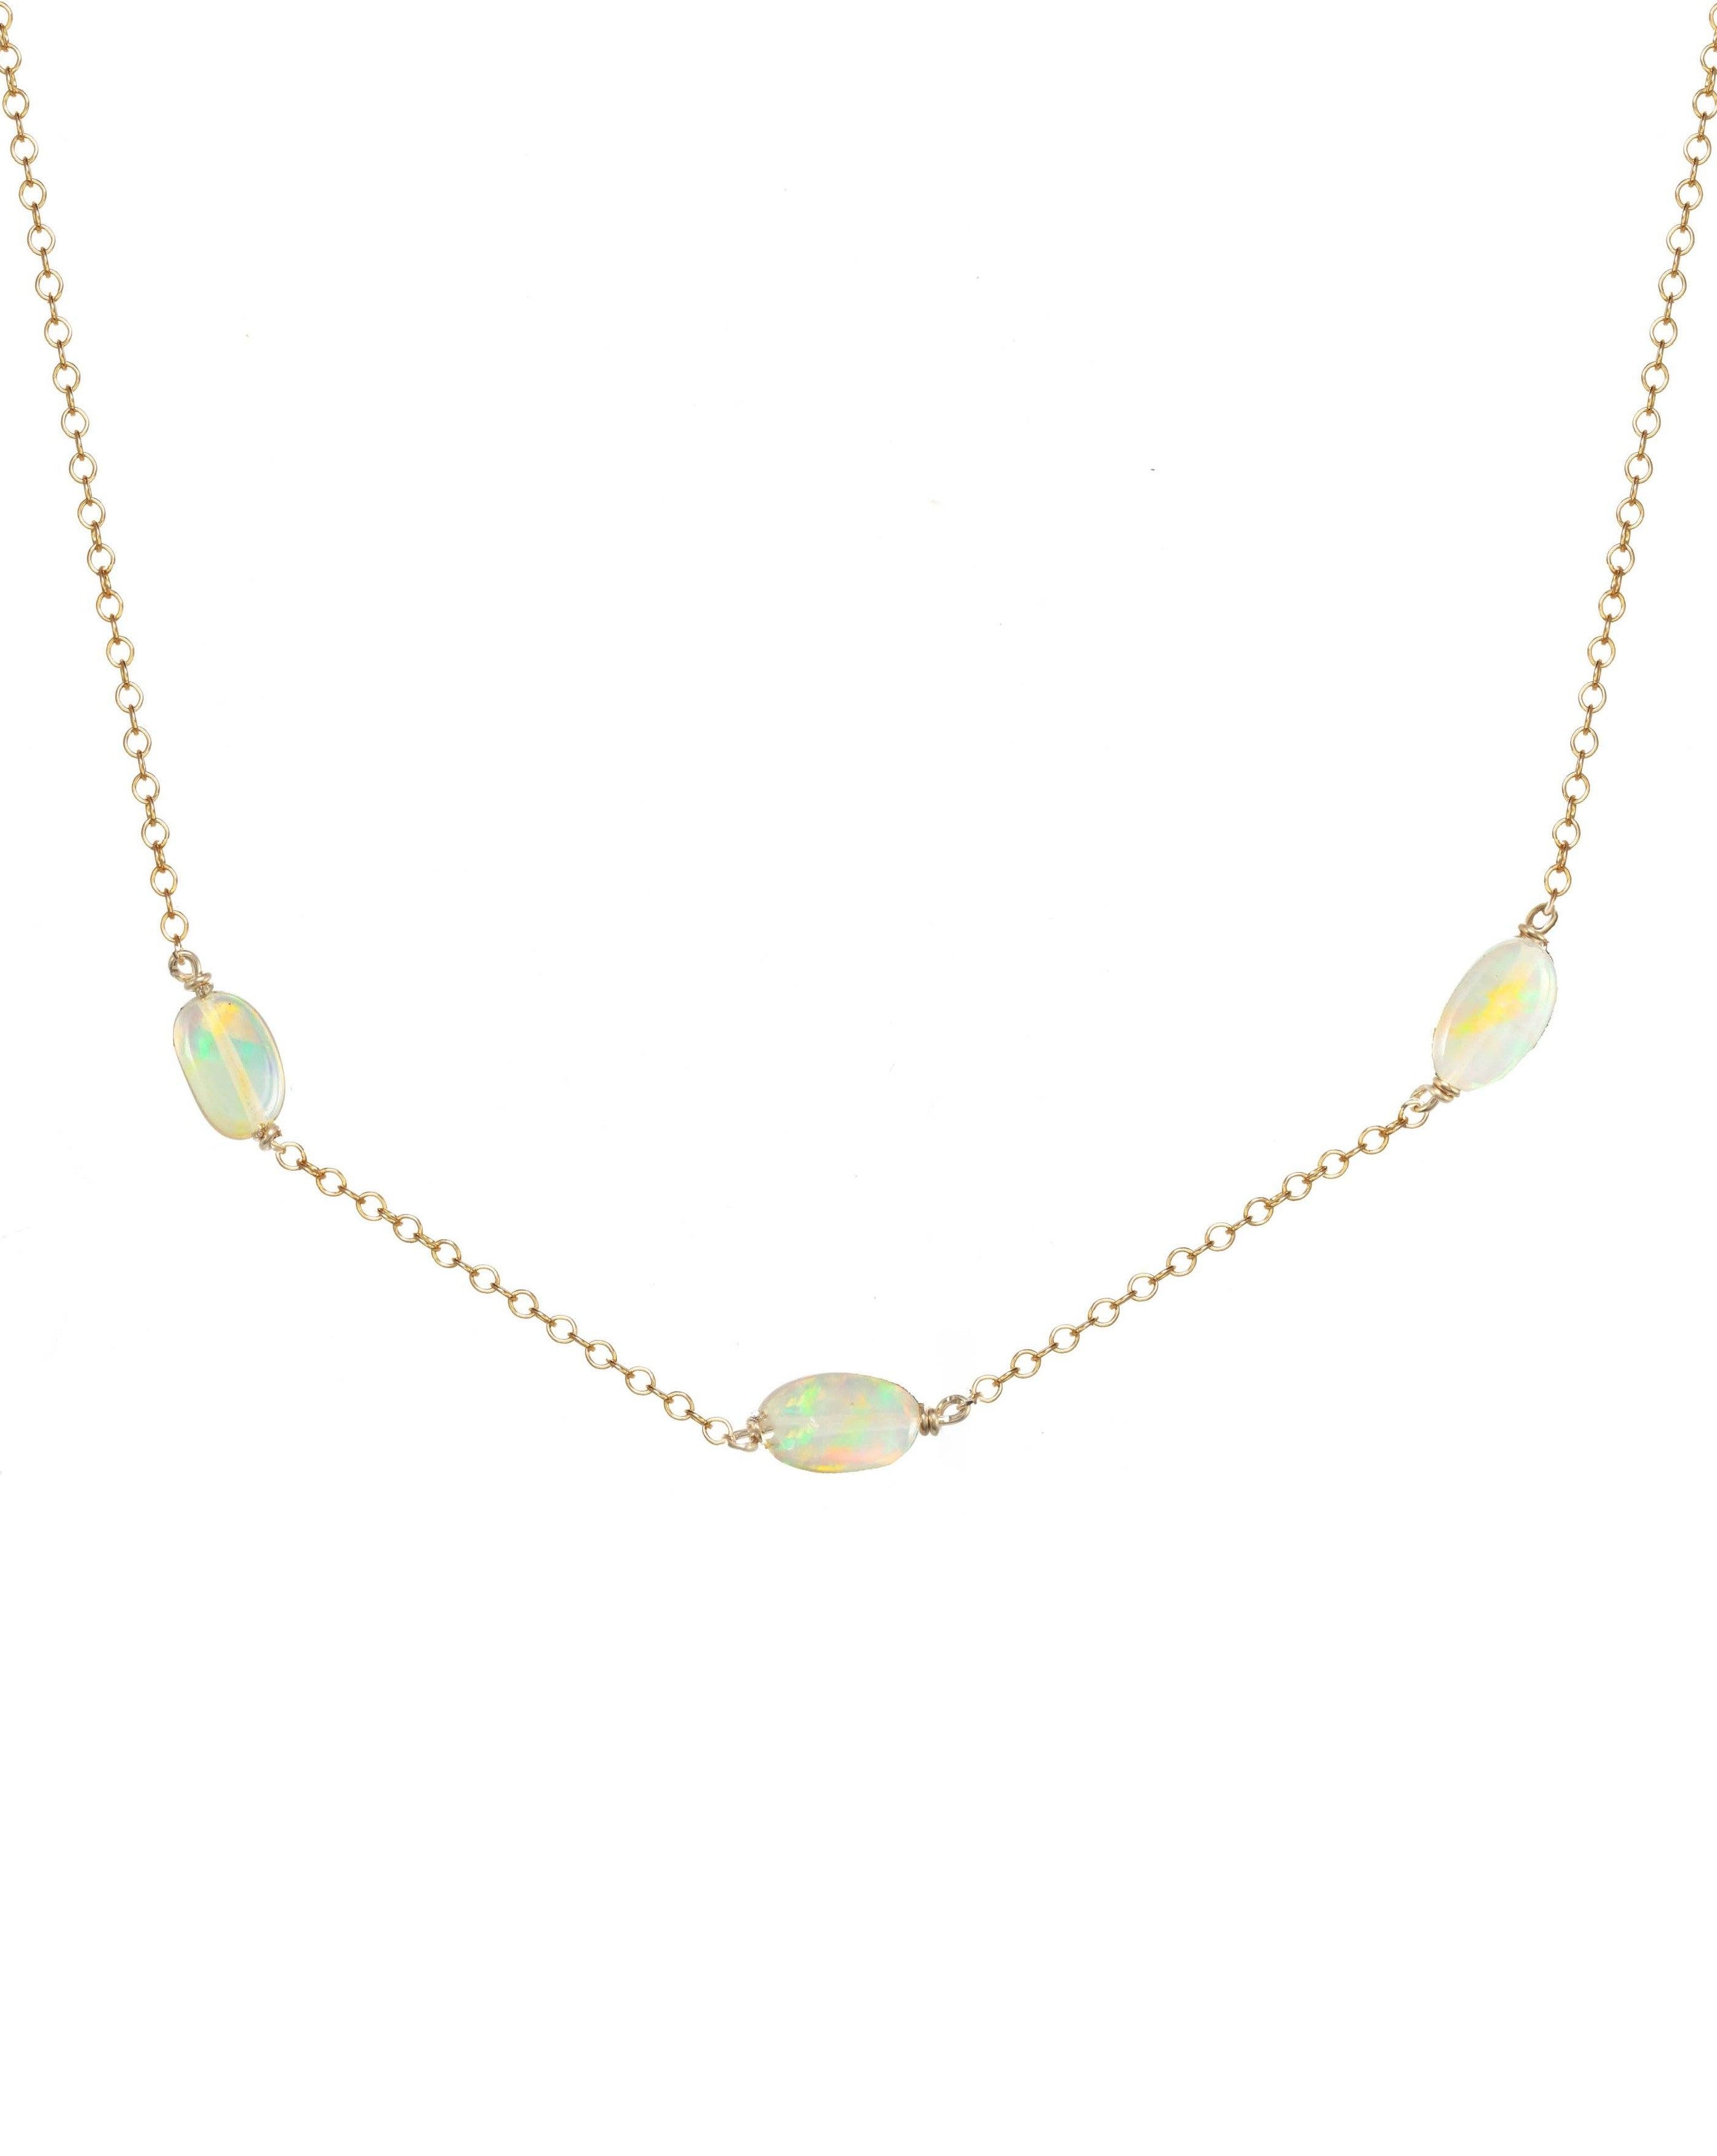 Erin Fire Necklace by KOZAKH. A 16 to 18 inch adjustable length necklace in 14K Gold Filled, featuring 4mm to 5mm smooth Fire Opal gems.